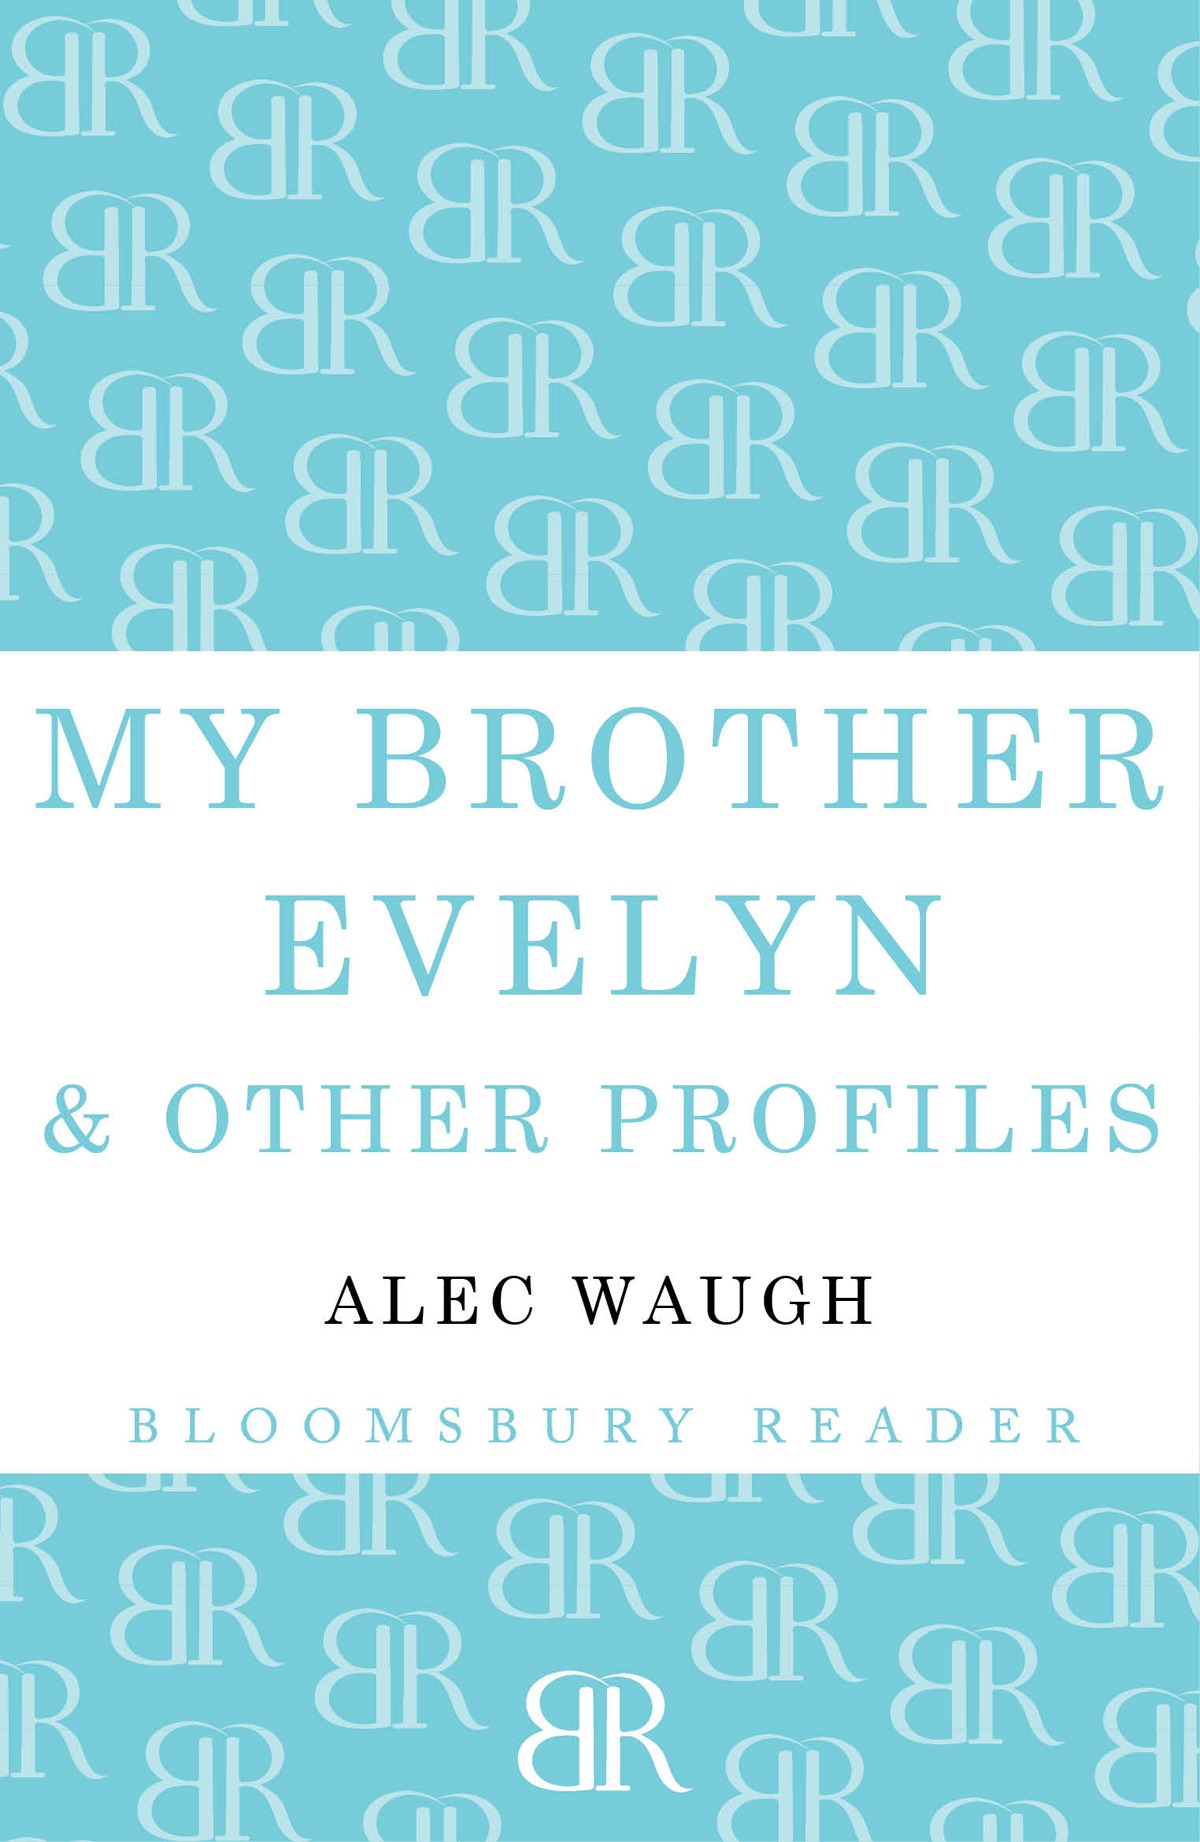 My Brother Evelyn & Other Profiles (1967) by Alec Waugh